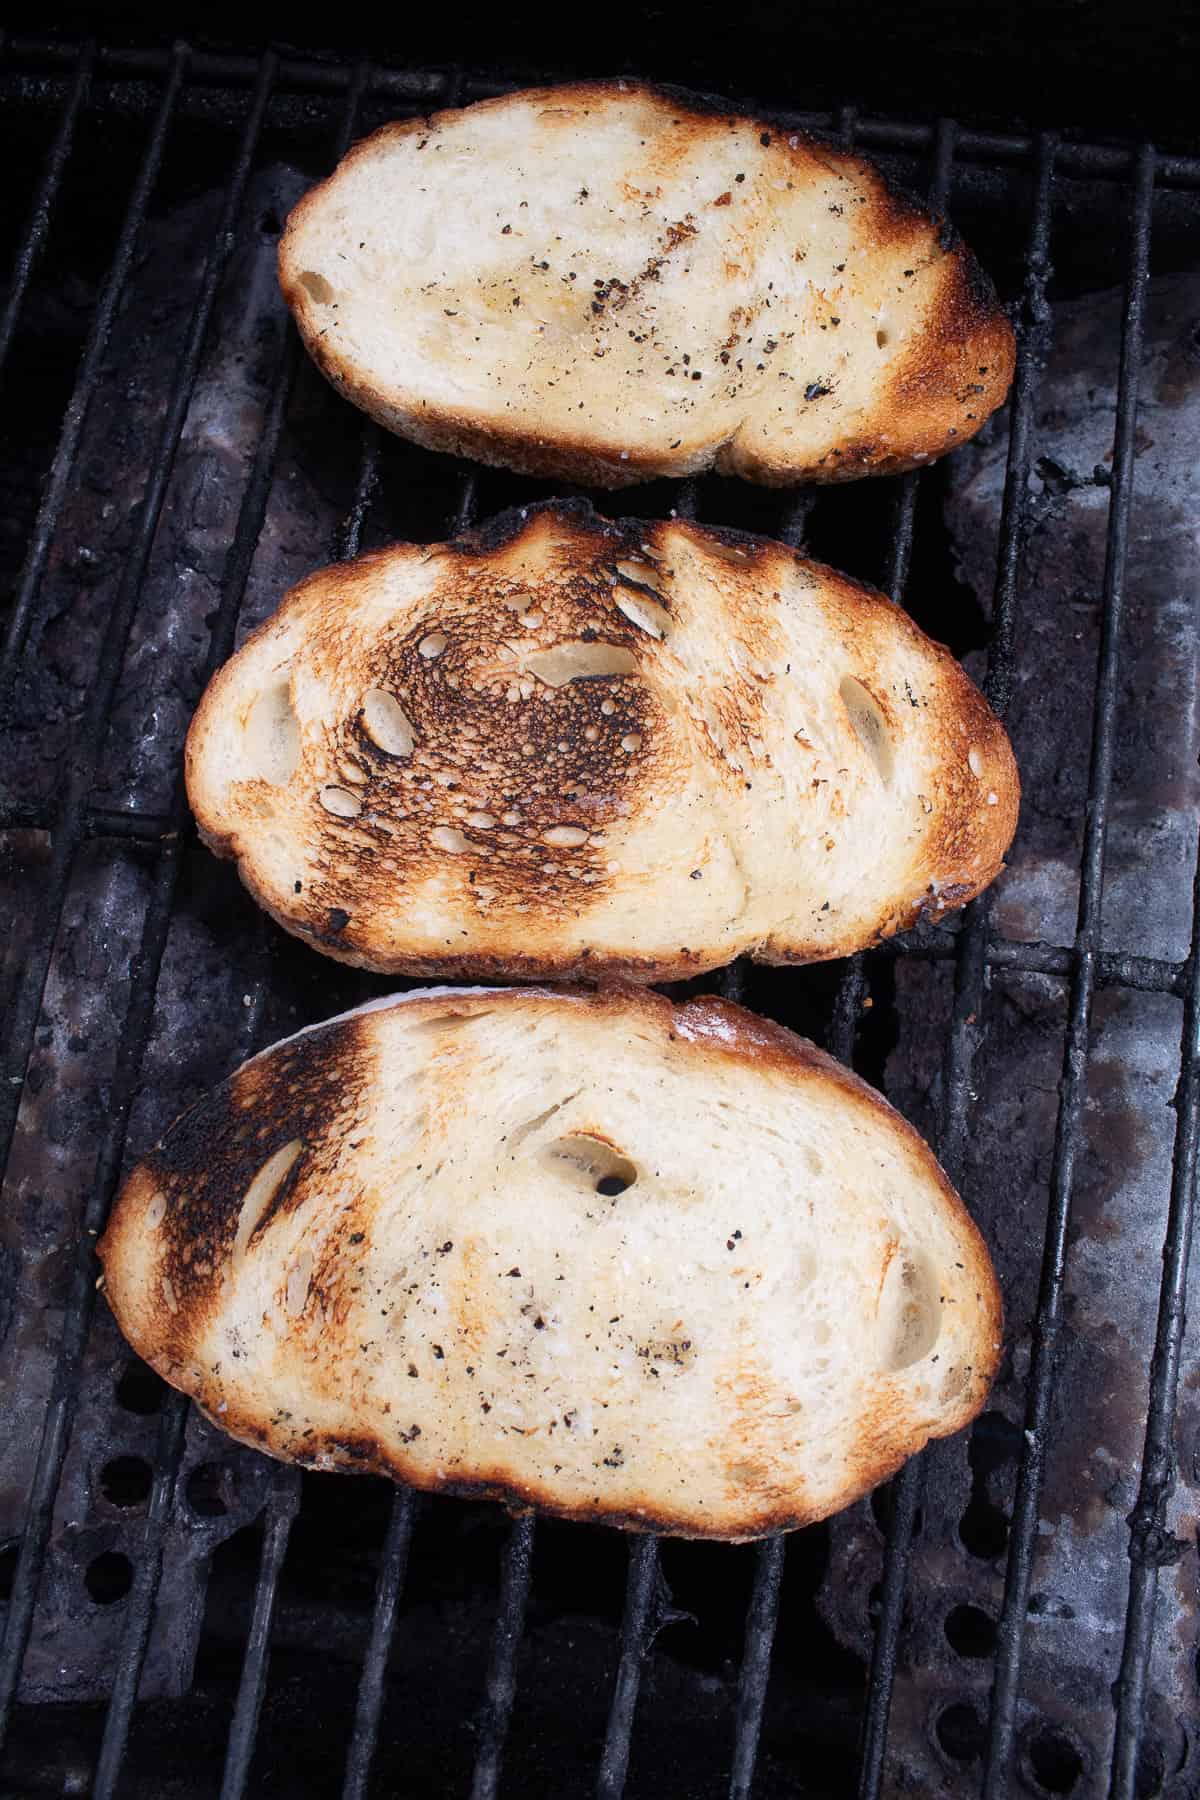 Seasoned bread is grilled over the grates and lightly charred in some spots.